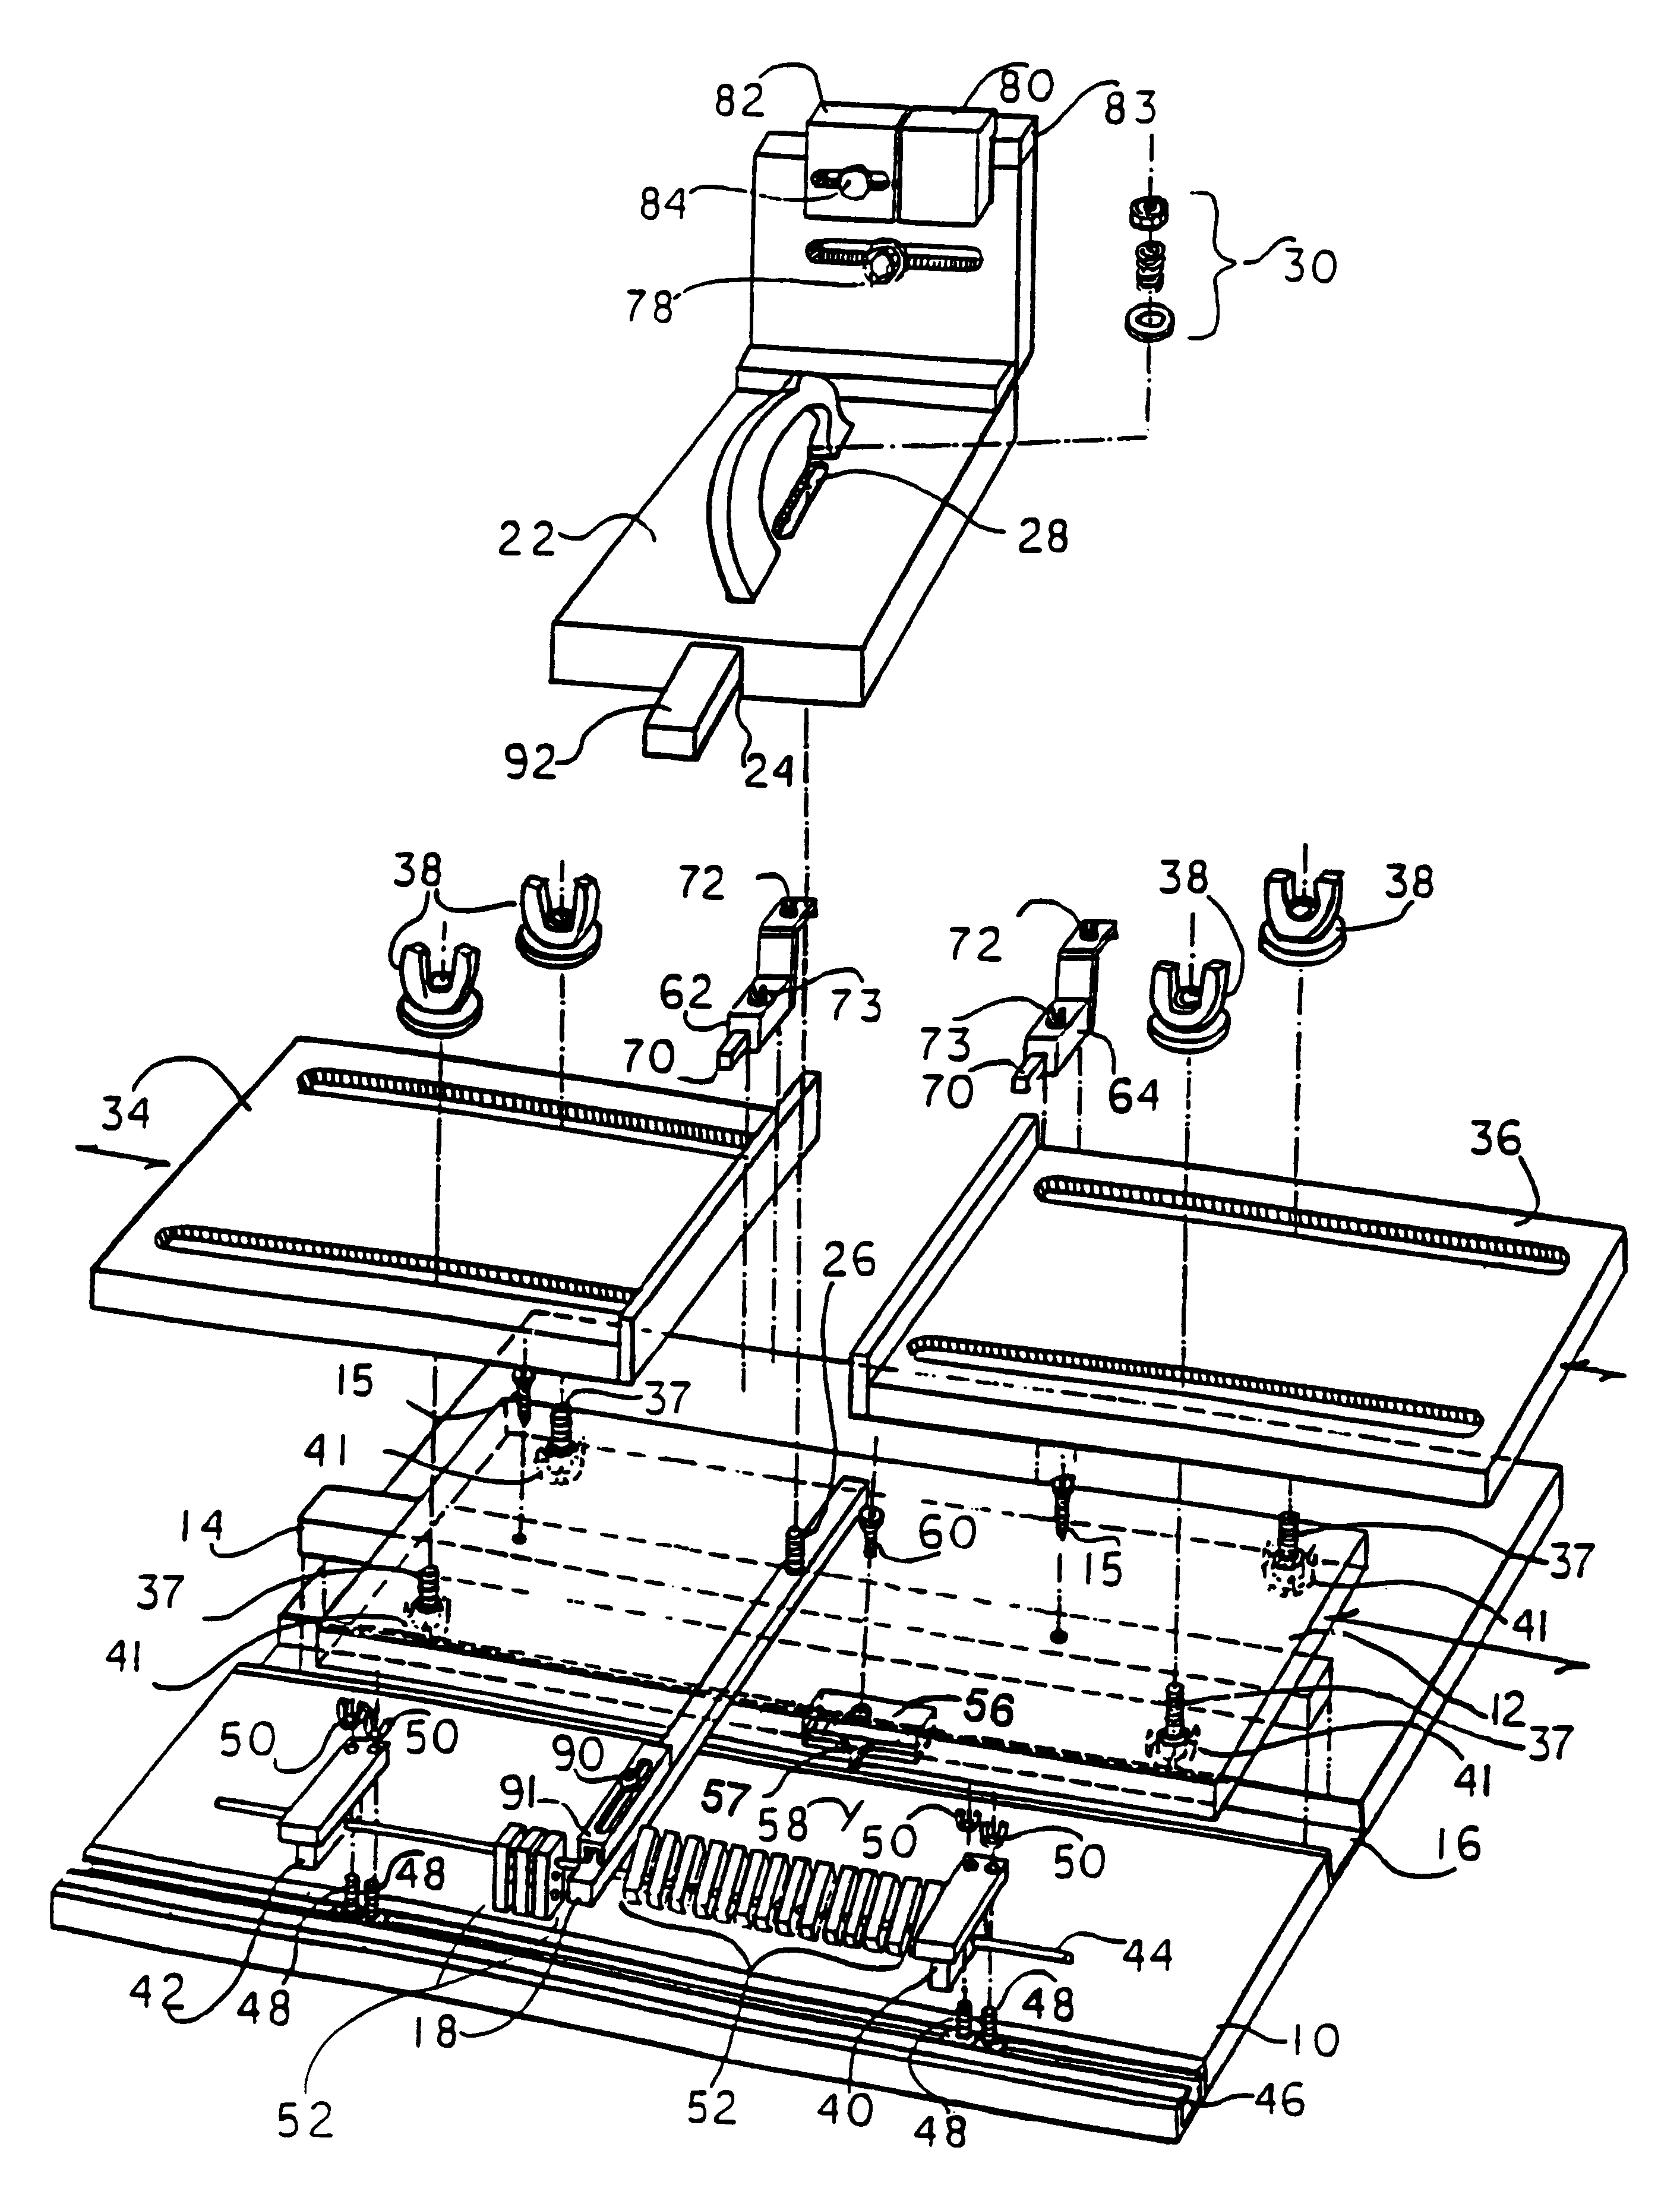 Jig system for positioning the placement of multiple cuts in a workpiece